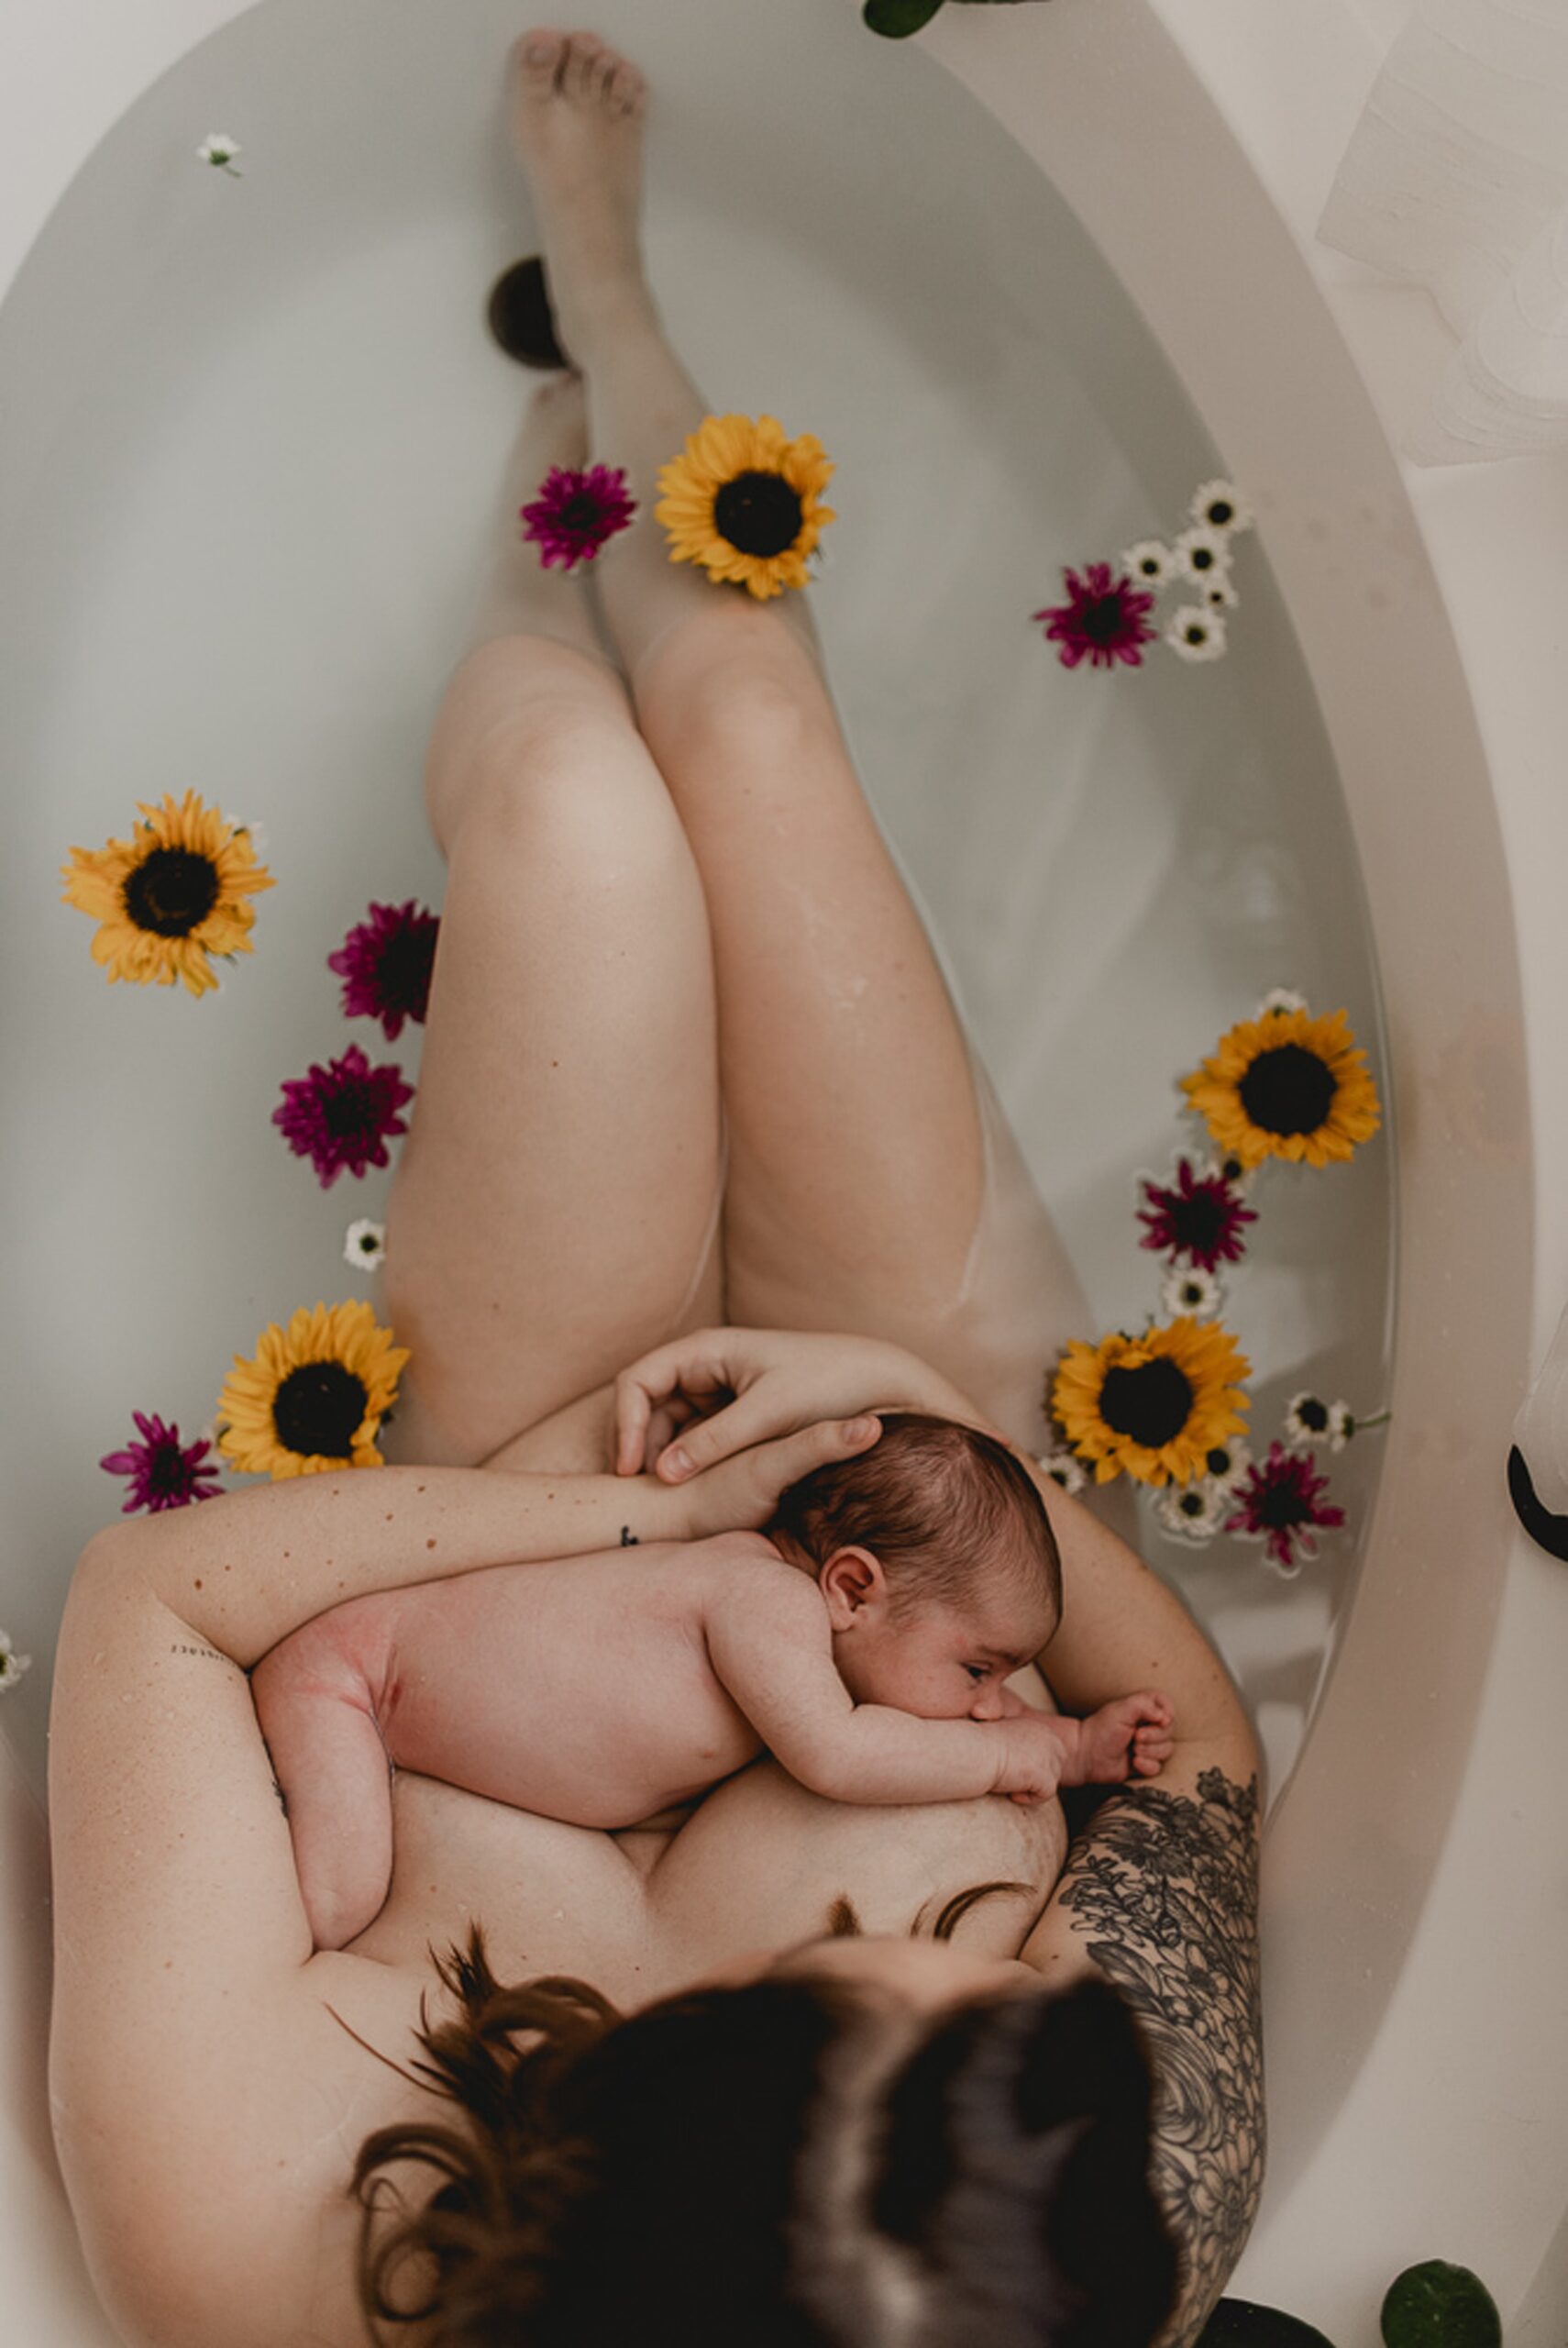 A new mom breastfeeds her newborn baby while sitting in a bathrub with flowers floating around them